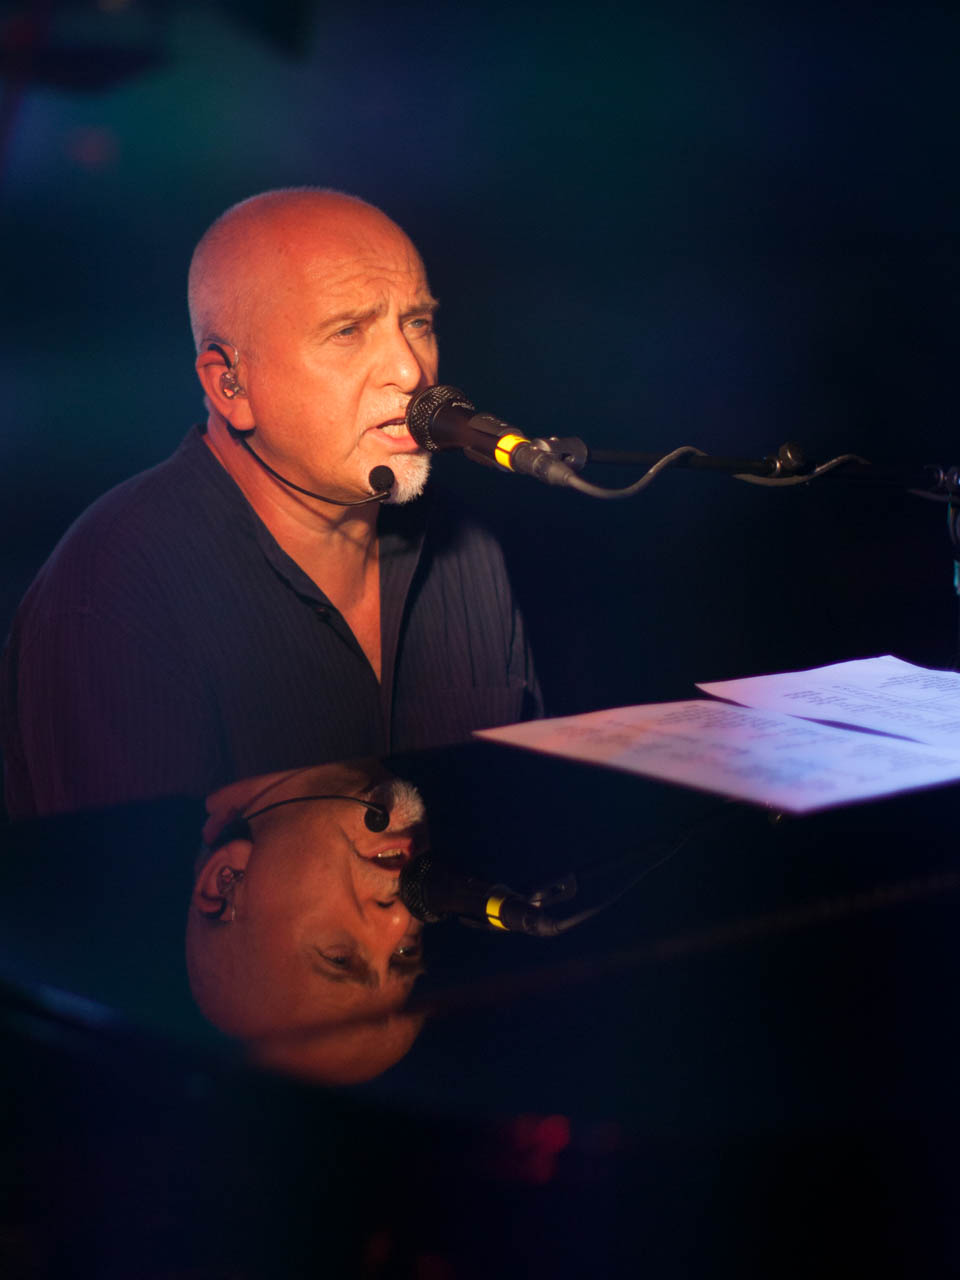 Peter Gabriel Plots European Tour in Support of New Album 'i/o